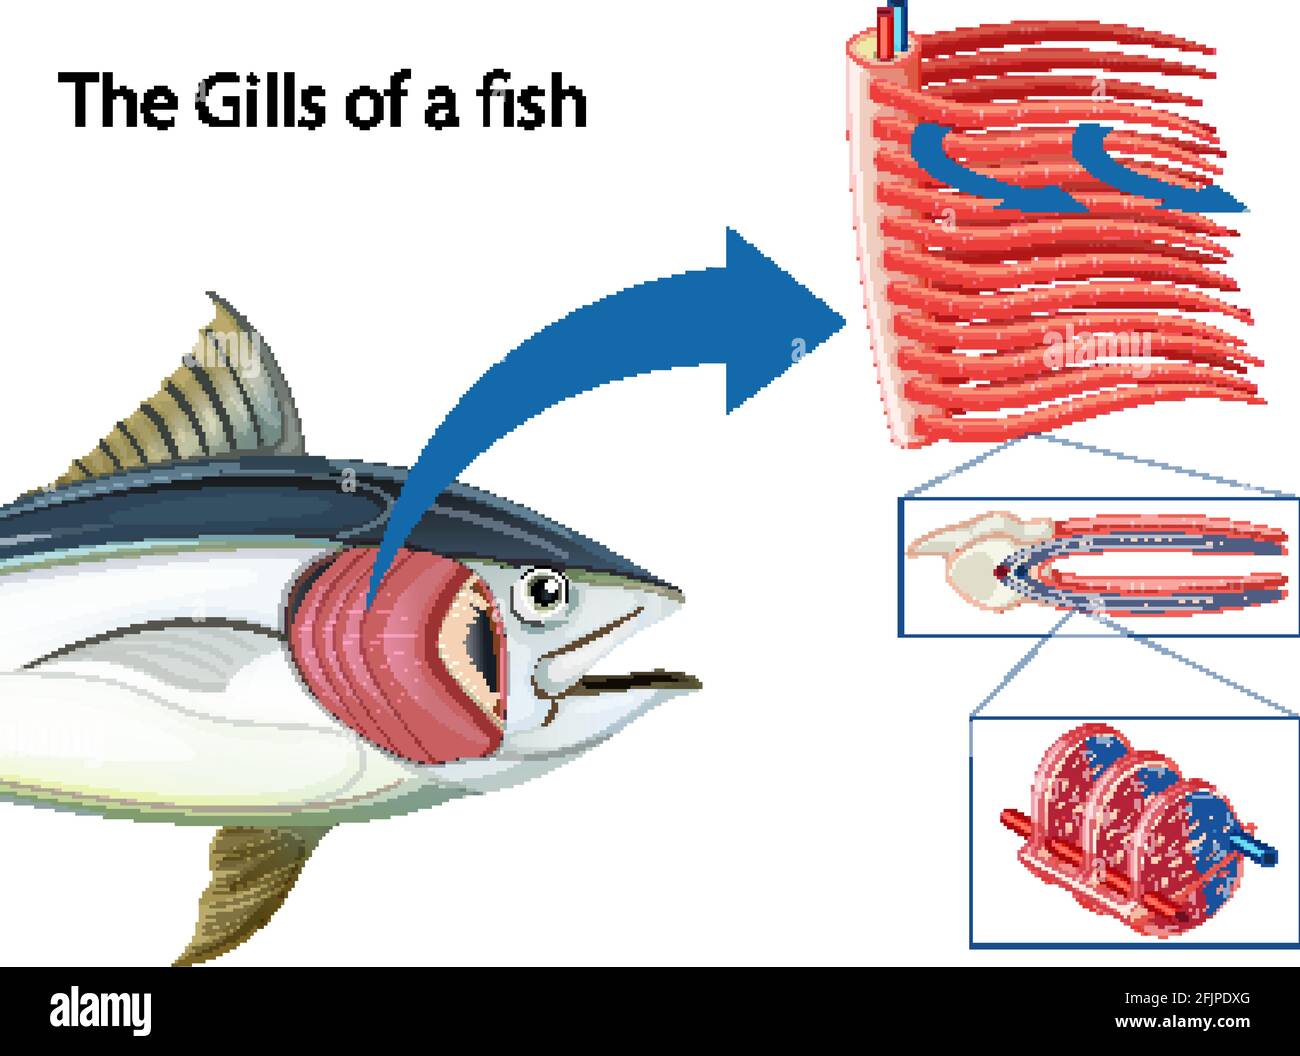 Diagram showing the grills of a fish illustration Stock Vector